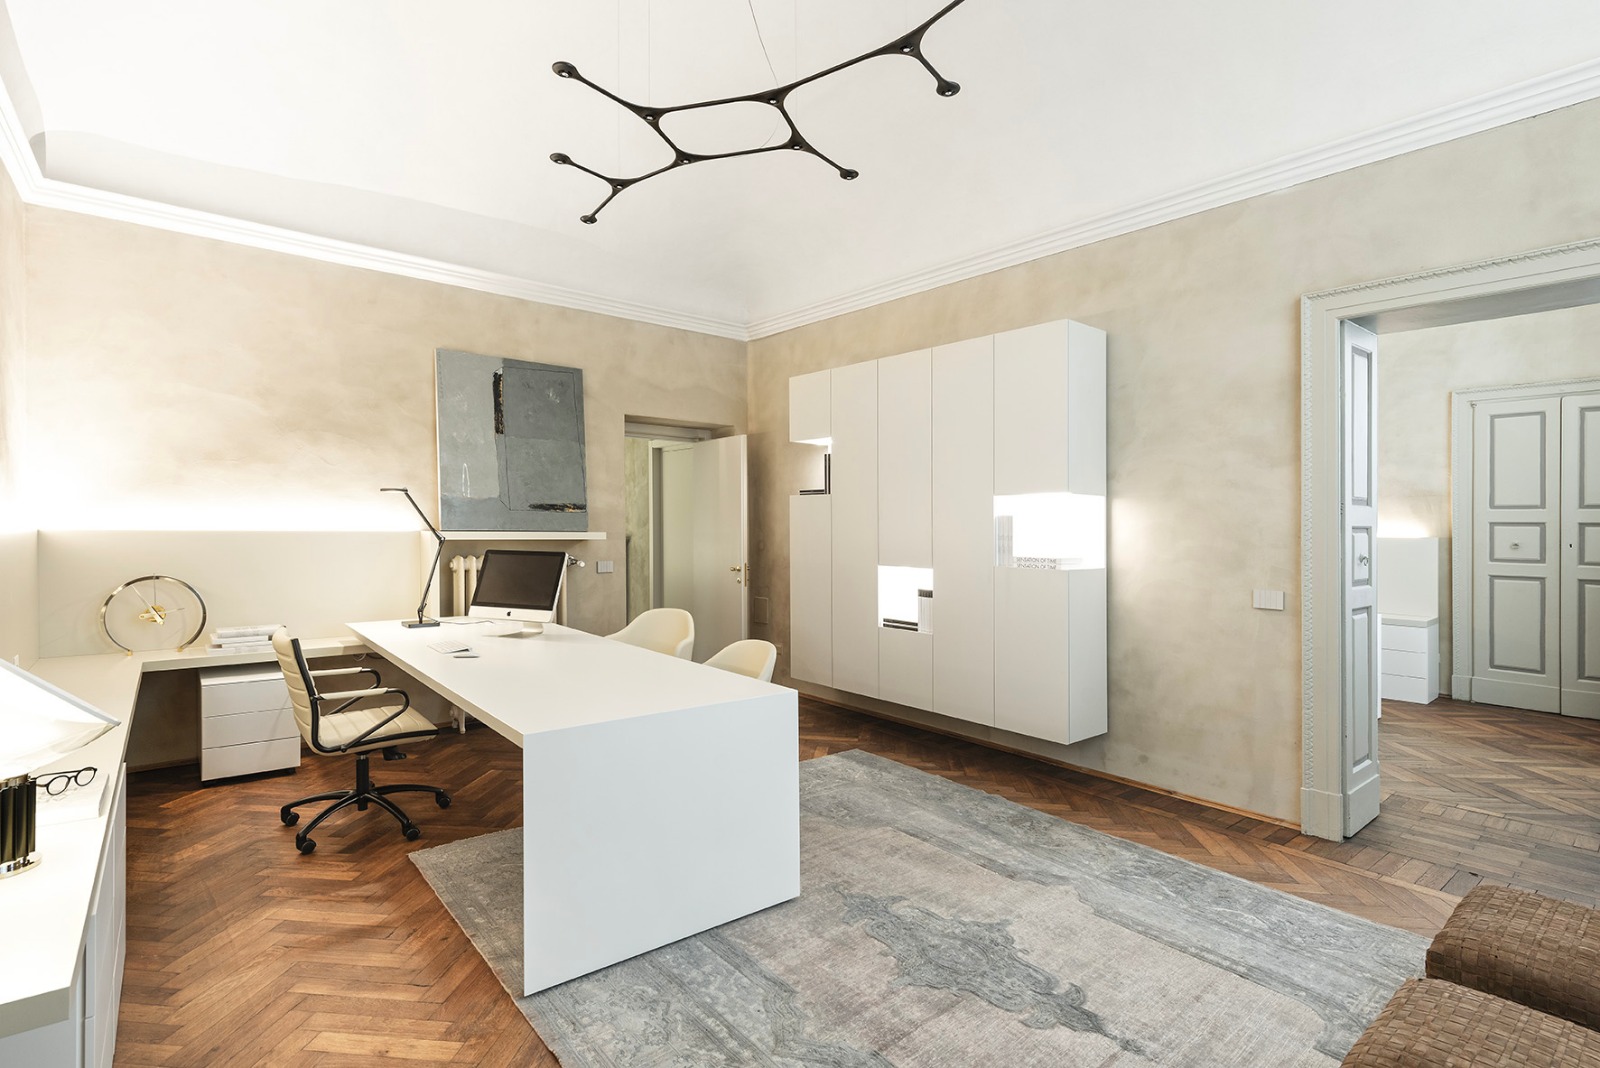 Office In Piacenza Italy Featuring Carbon Light By Tokio Project Designers Guglielmetti Interior 4, Design Authority